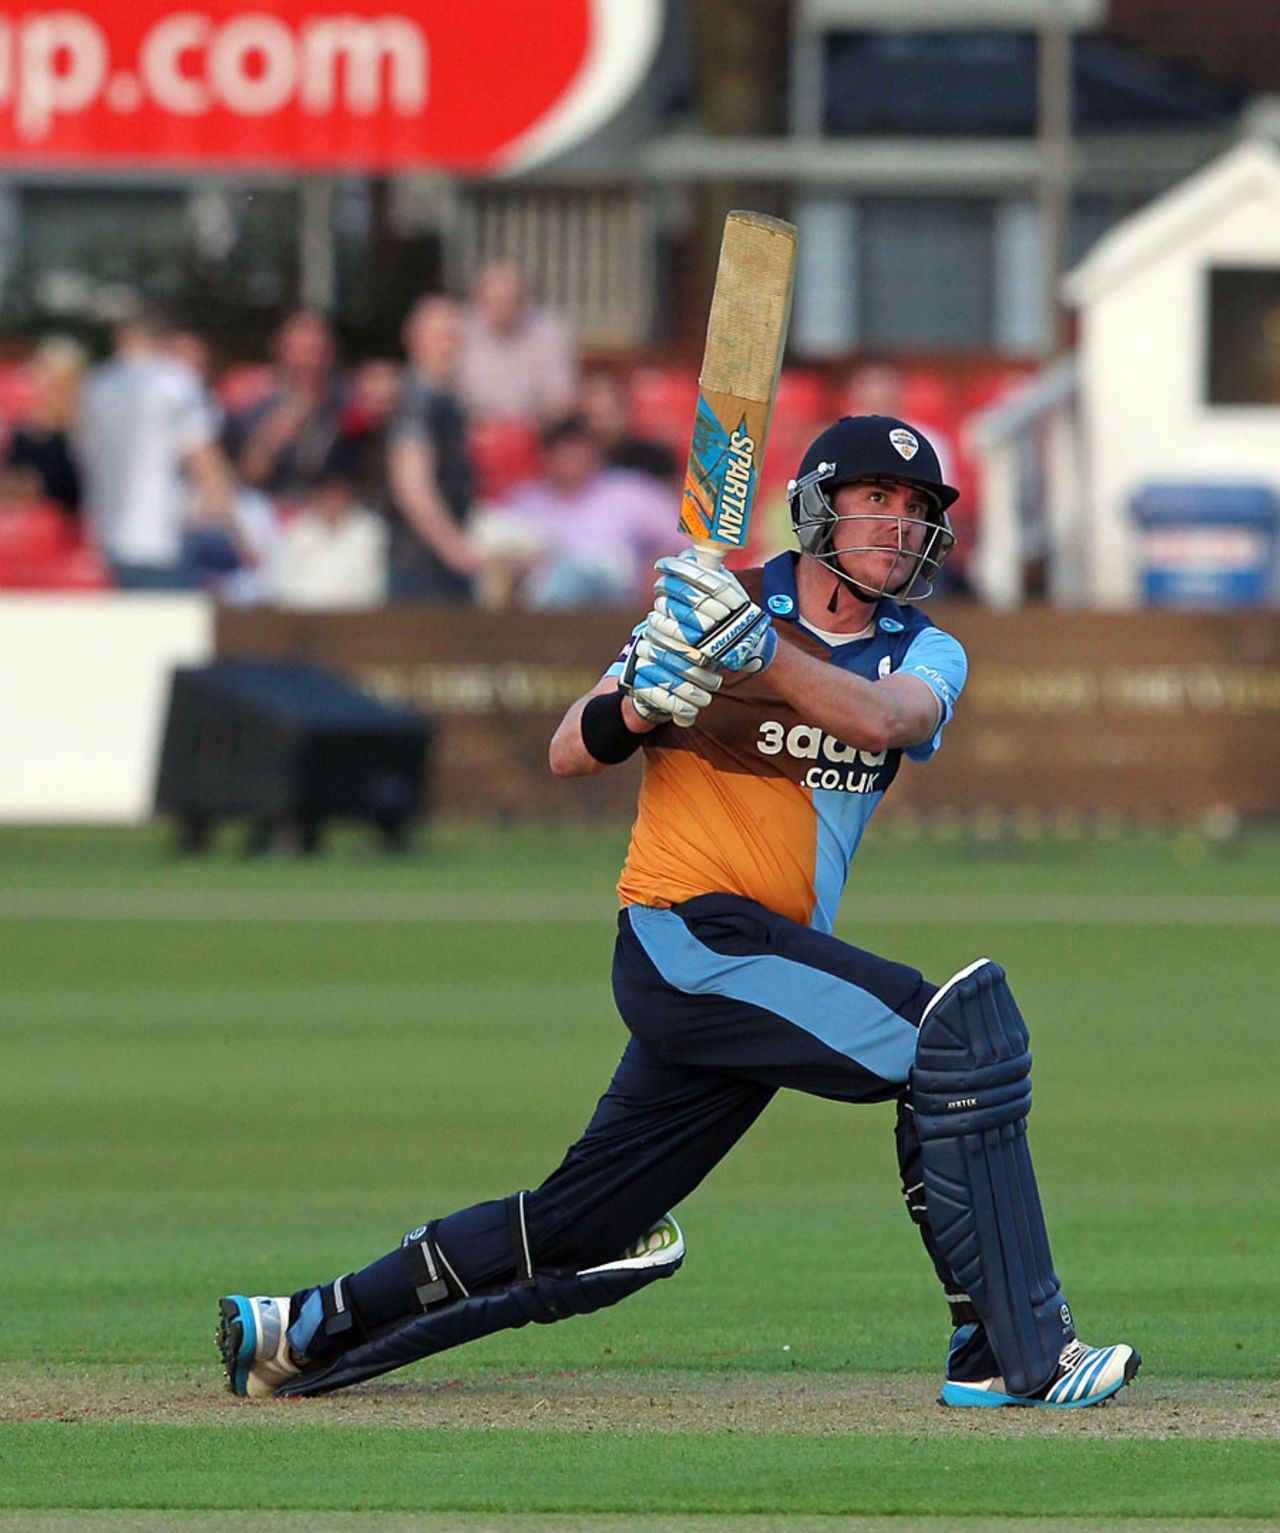 Marcus North made 90 but couldn't save Derbyshire from defeat, Leicestershire v Derbyshire, NatWest T20 Blast, Grace Road, May 16, 2014